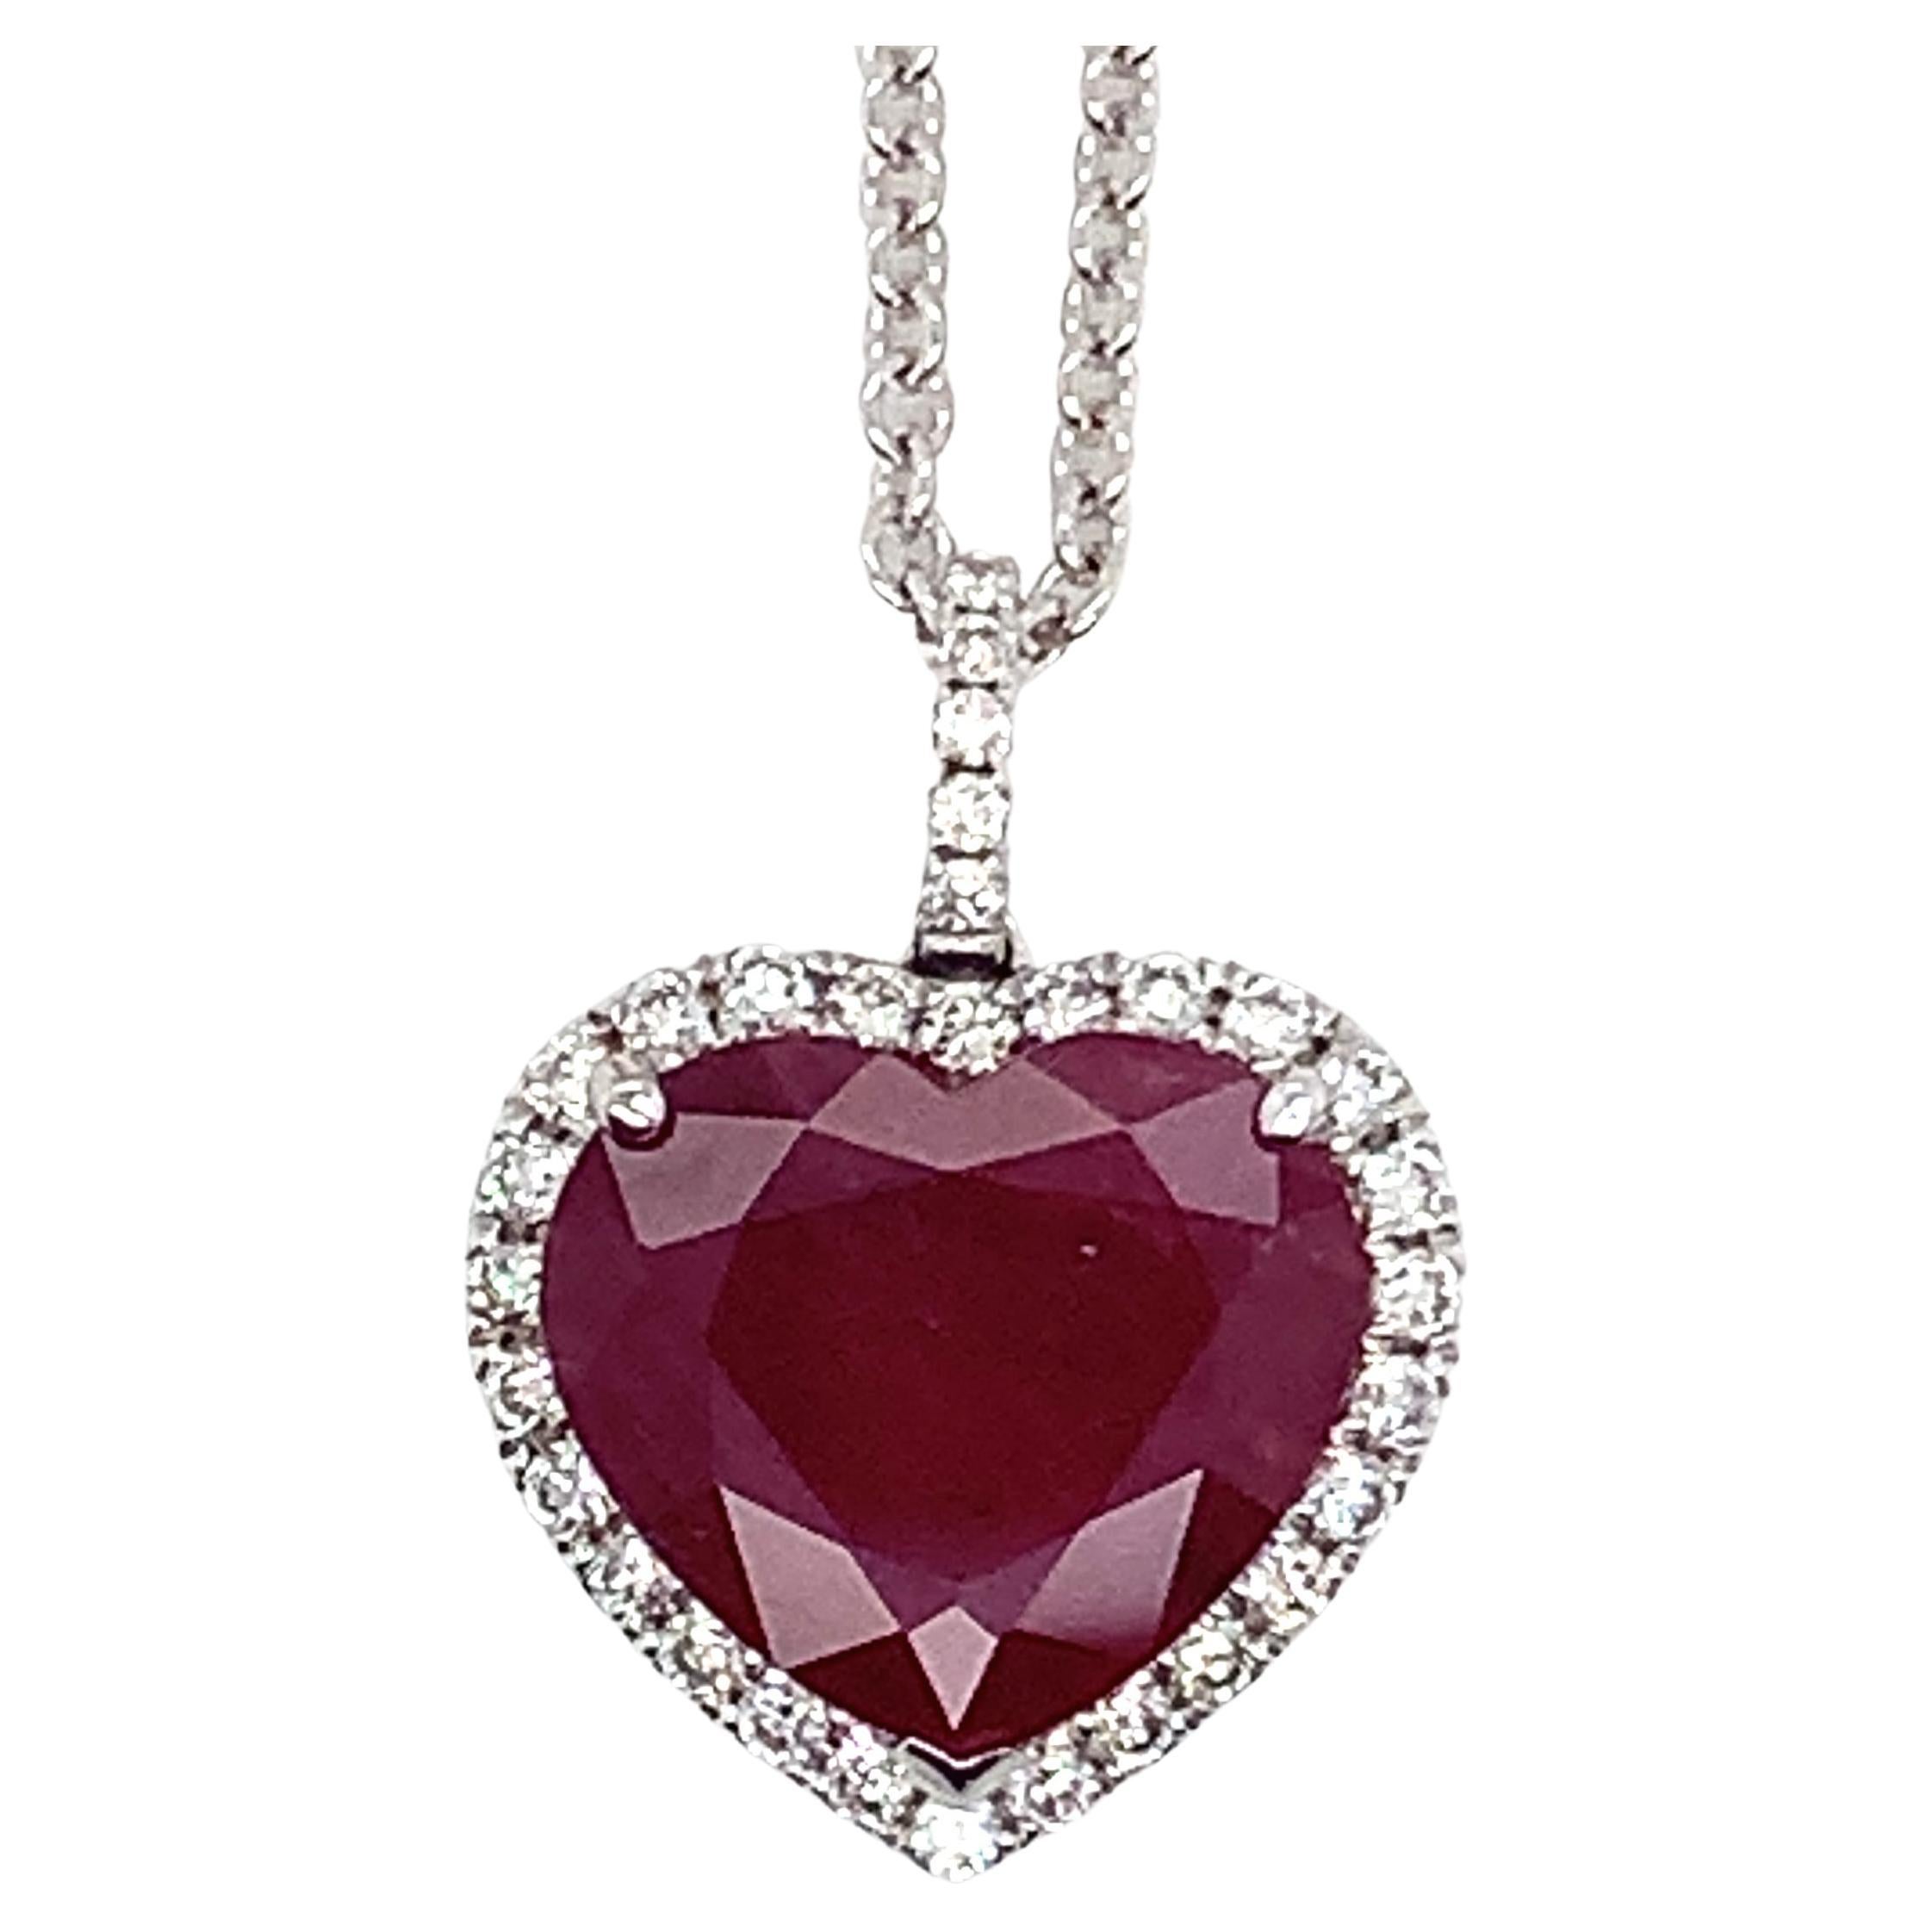 14k Yellow Gold Over Round Cut 2.20Ct Lovely Heart Shape Ruby Pendant Free Chain 